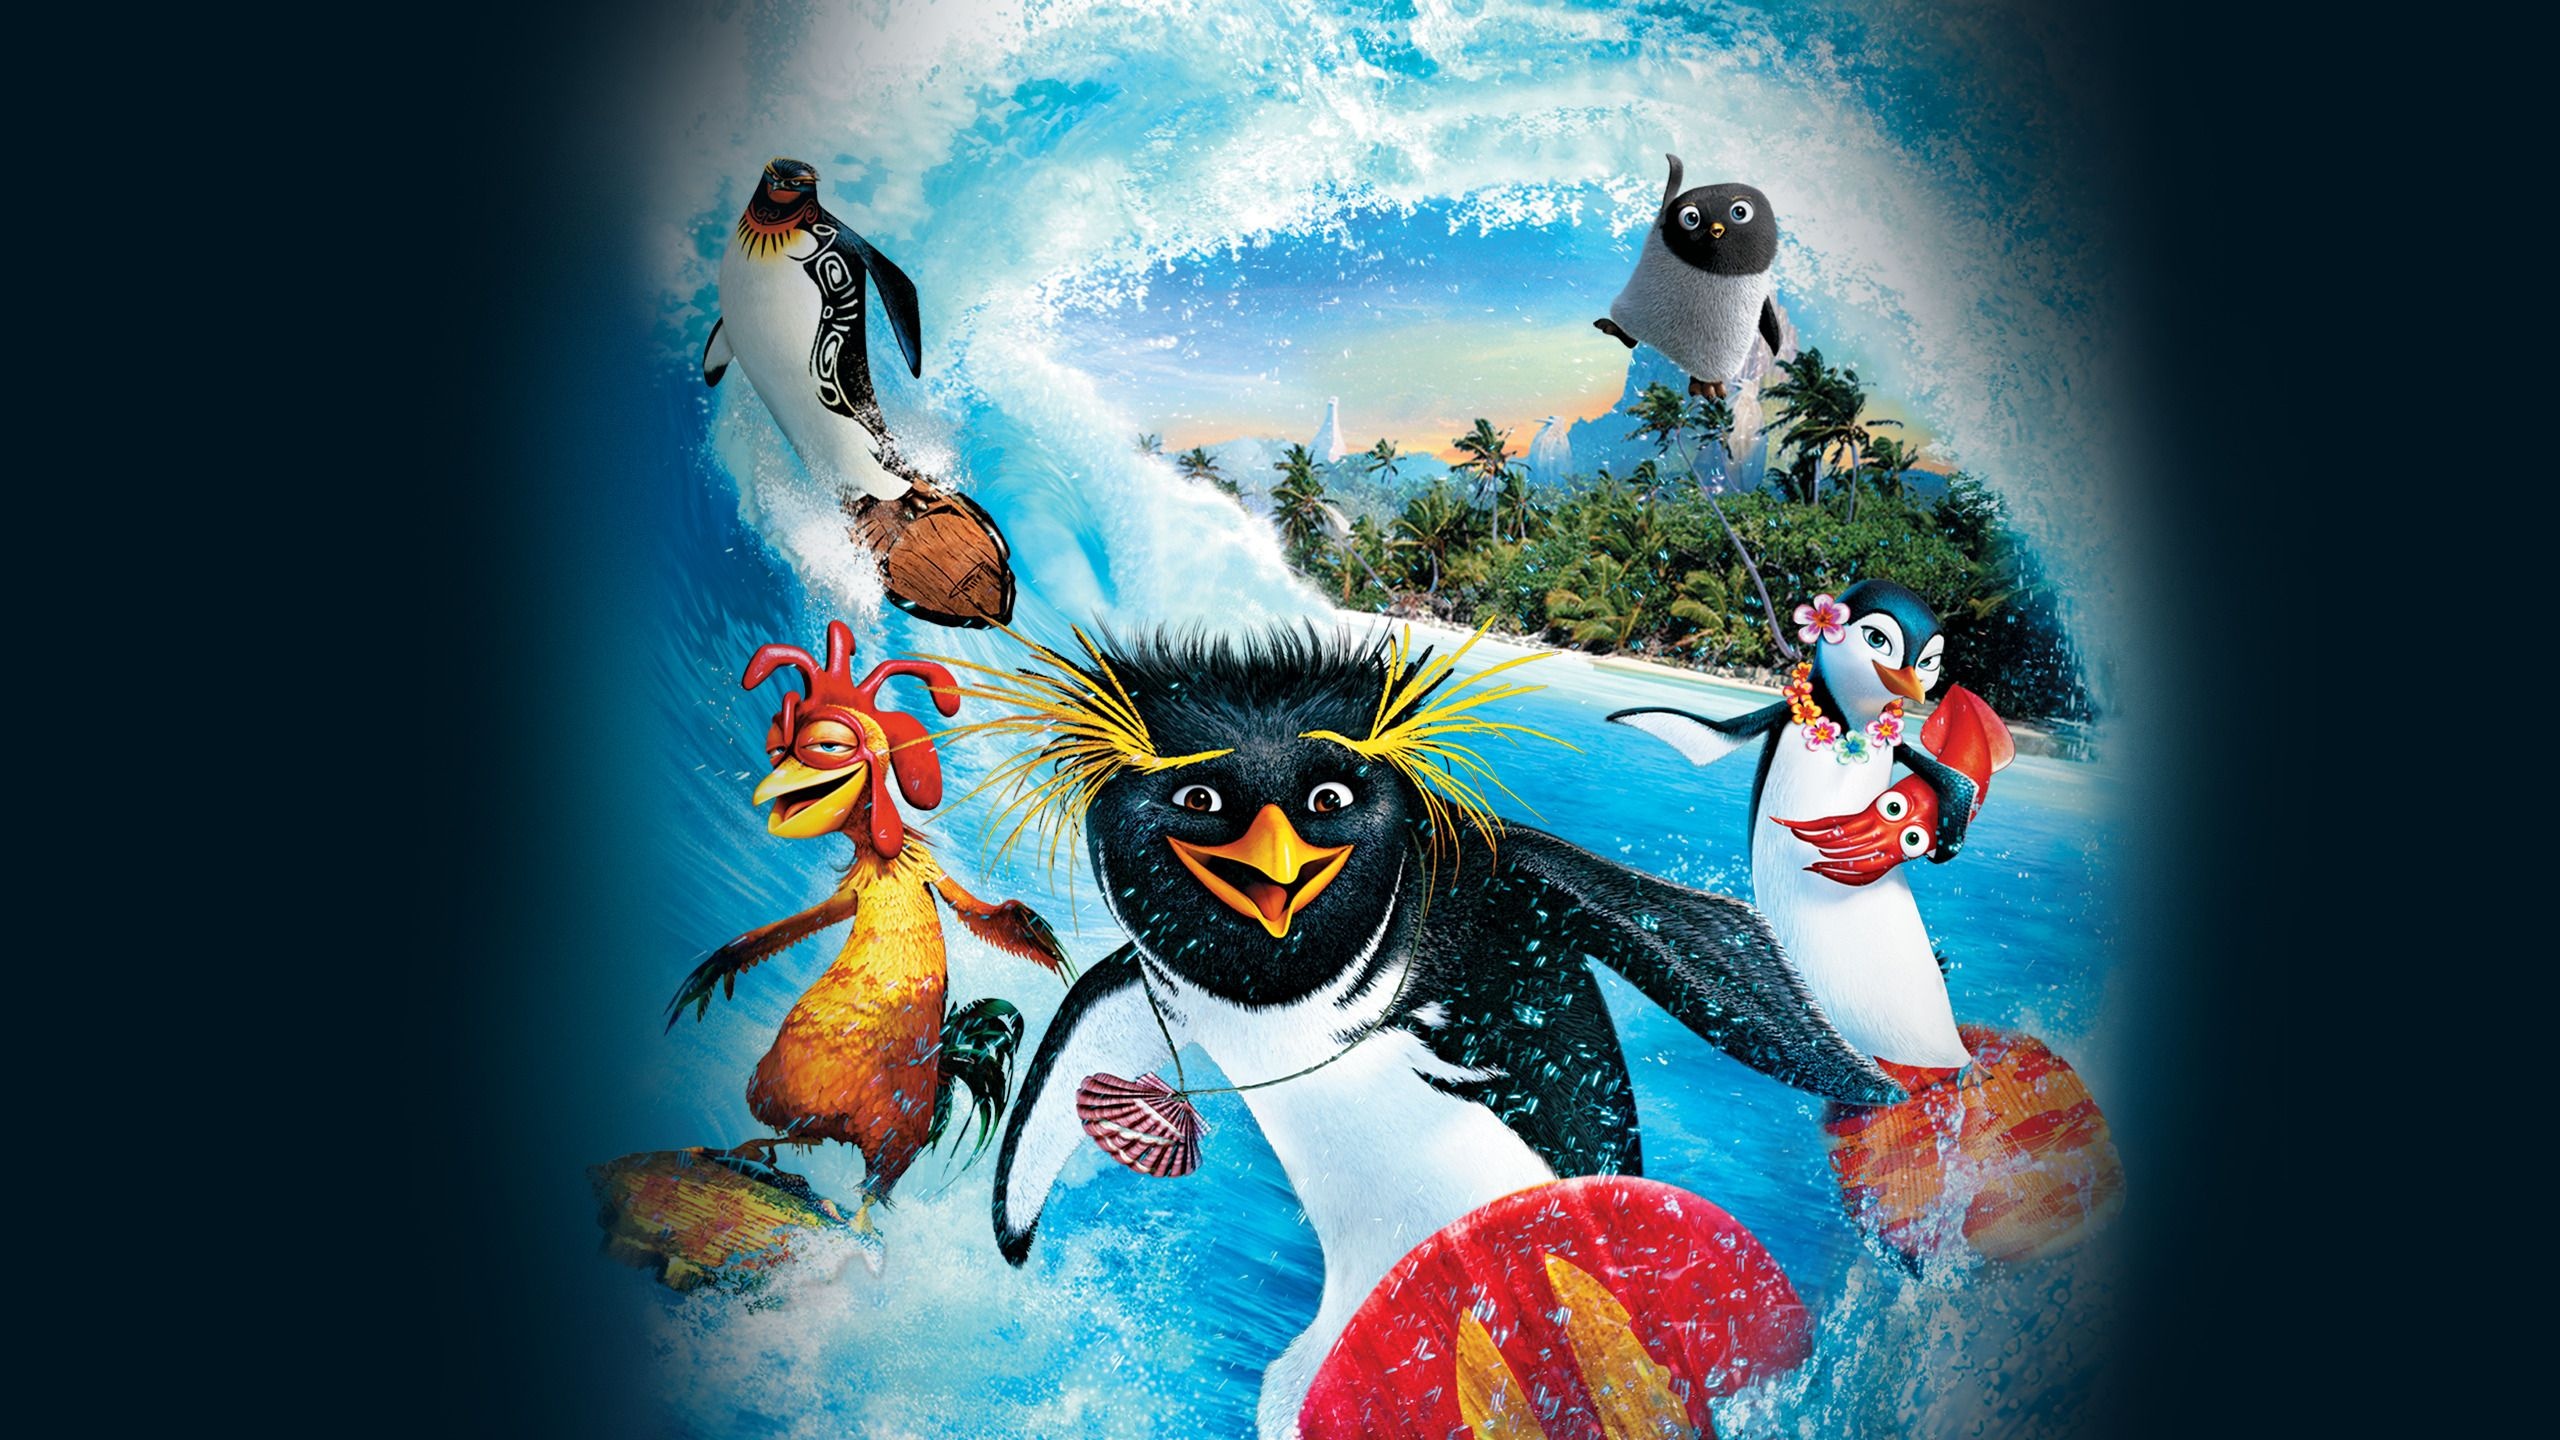 Surf's Up Animation, Movies Anywhere, Surfer Penguins, 2560x1440 HD Desktop